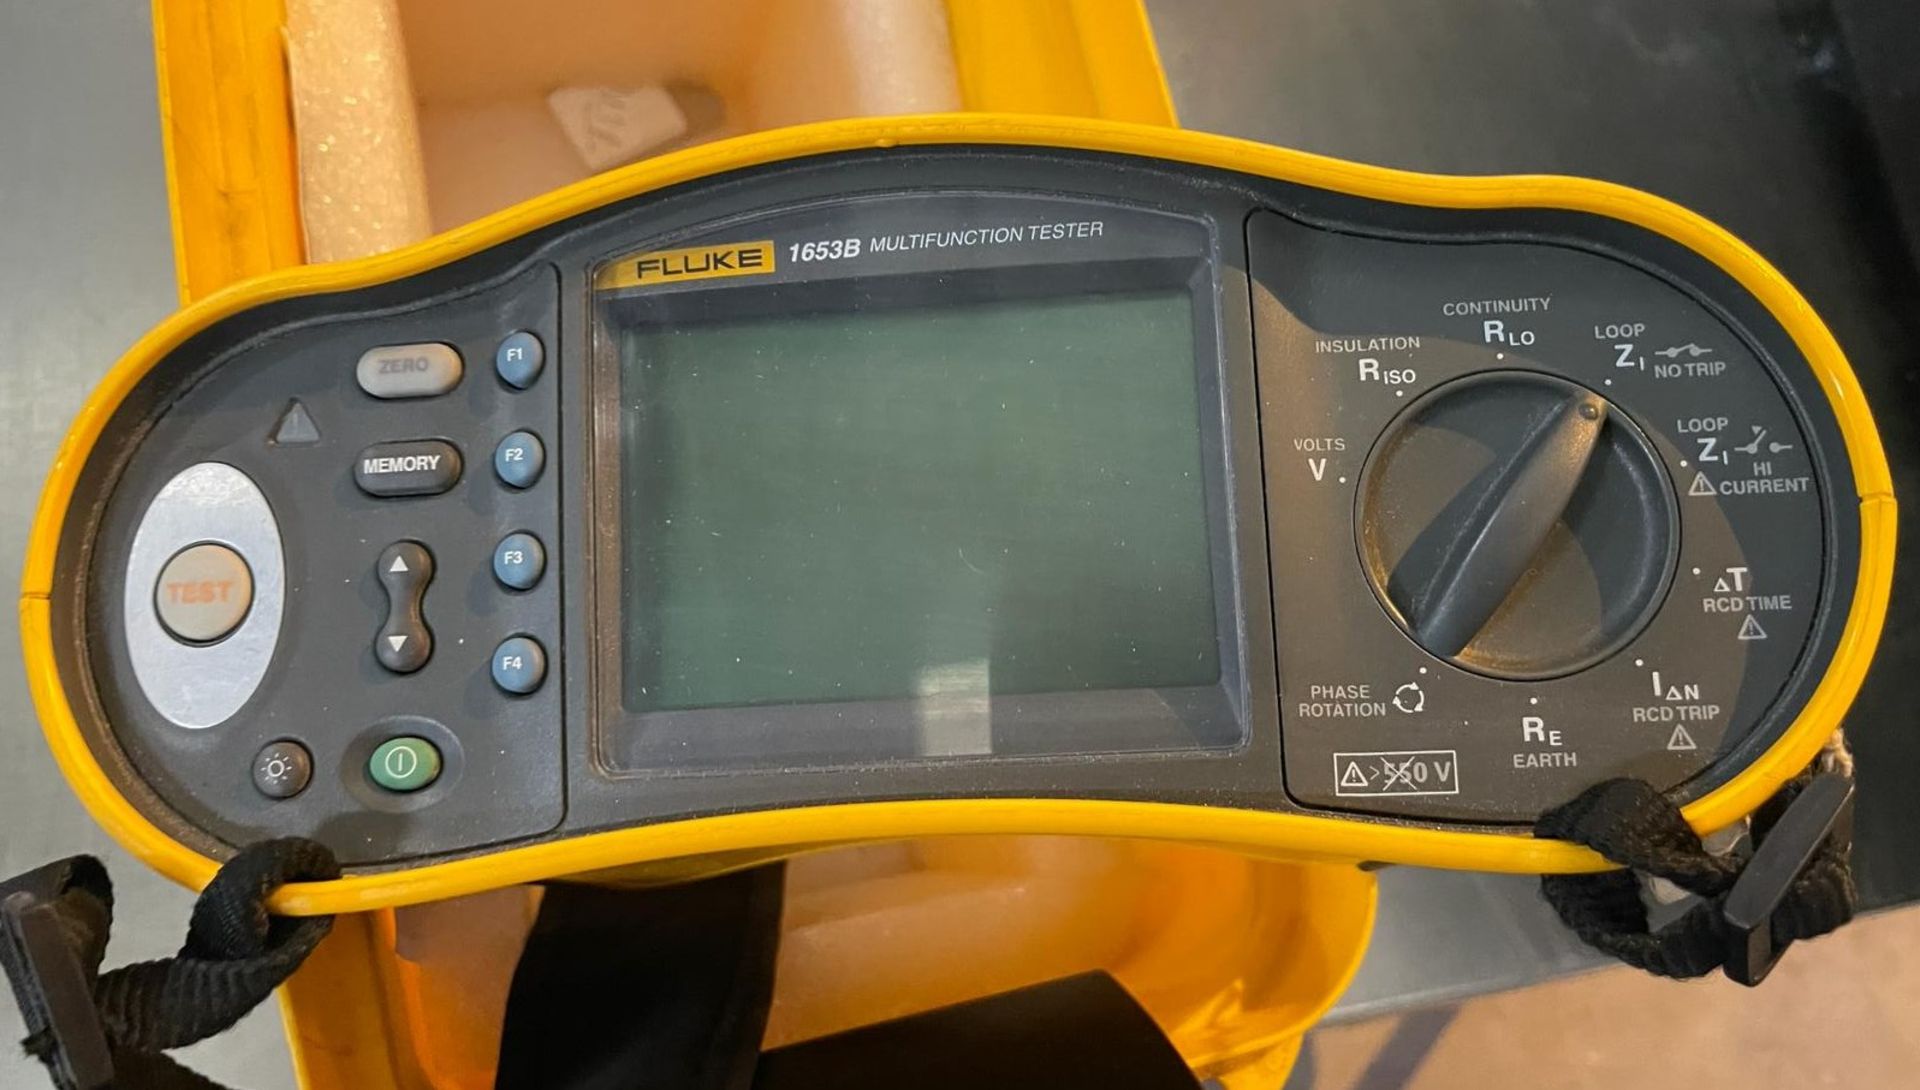 1 x Fluke 1653B Multifunction Tester - Includes Carry Case and Accessories - Image 4 of 12